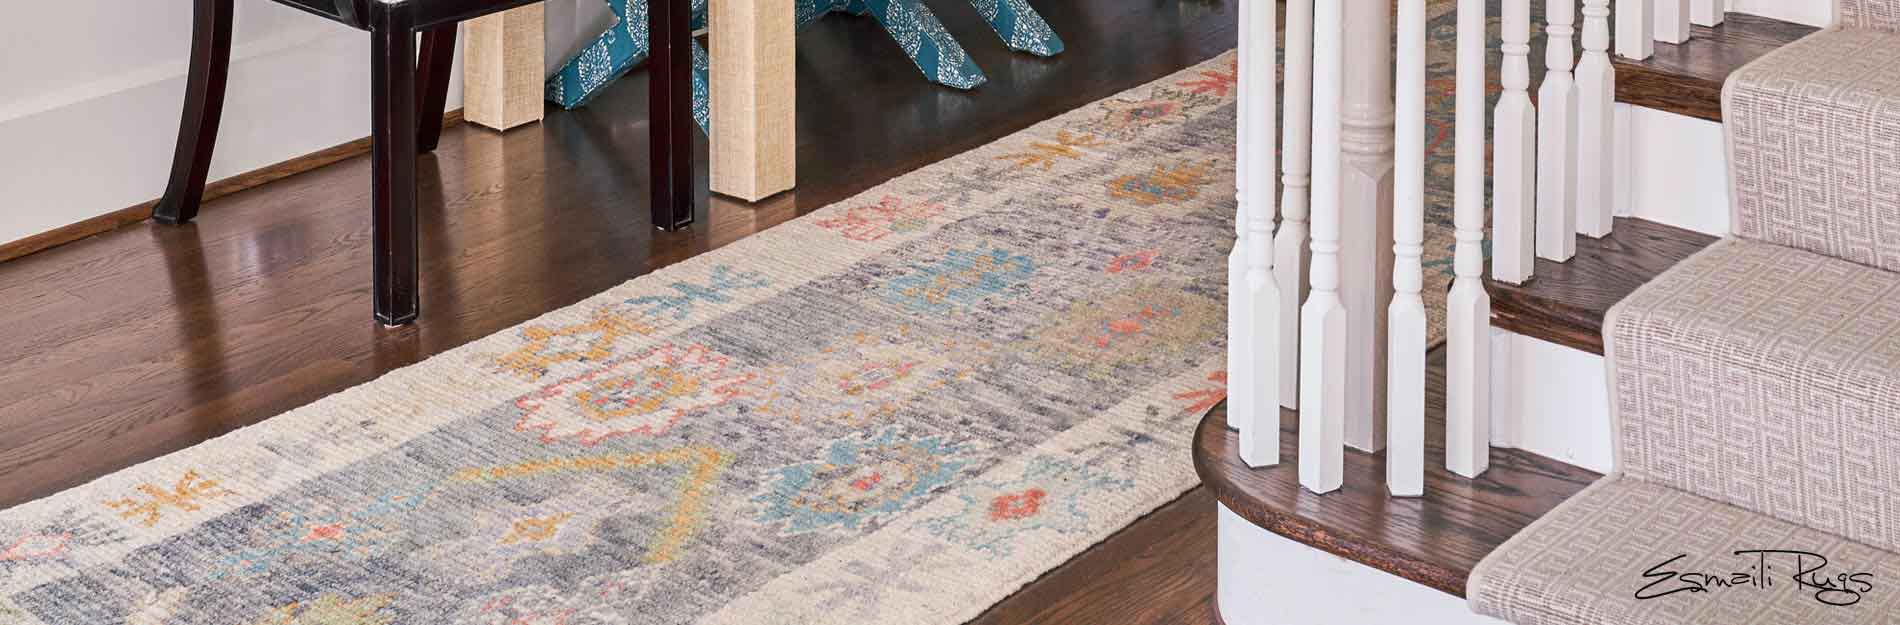 Contemporary Hallway Rugs Carpet Runners